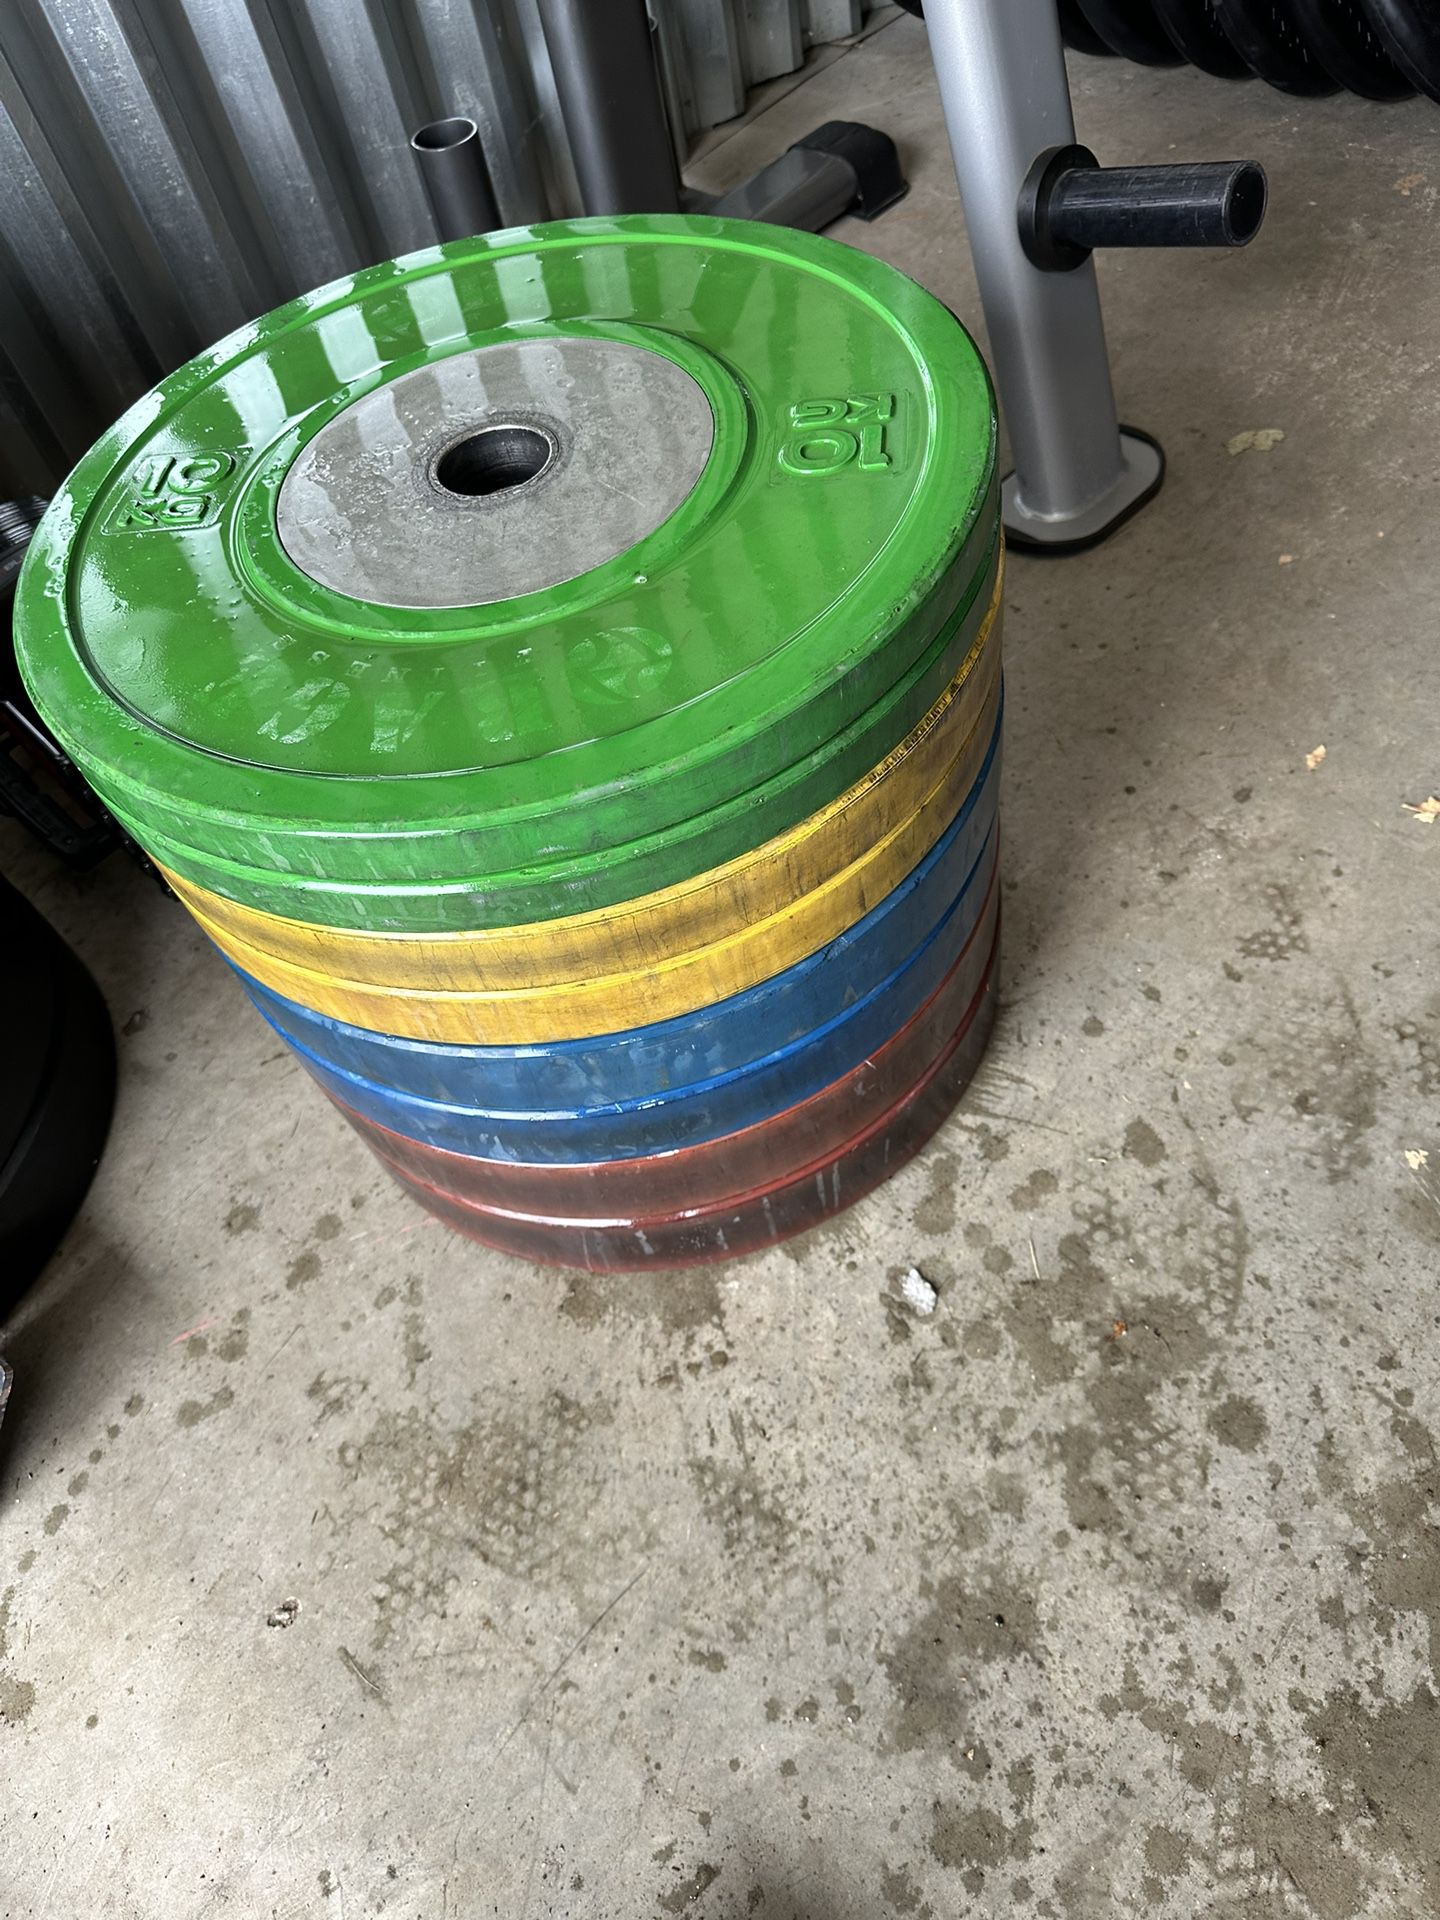 140kg/308lb Olympic competition rubber bumper weight set